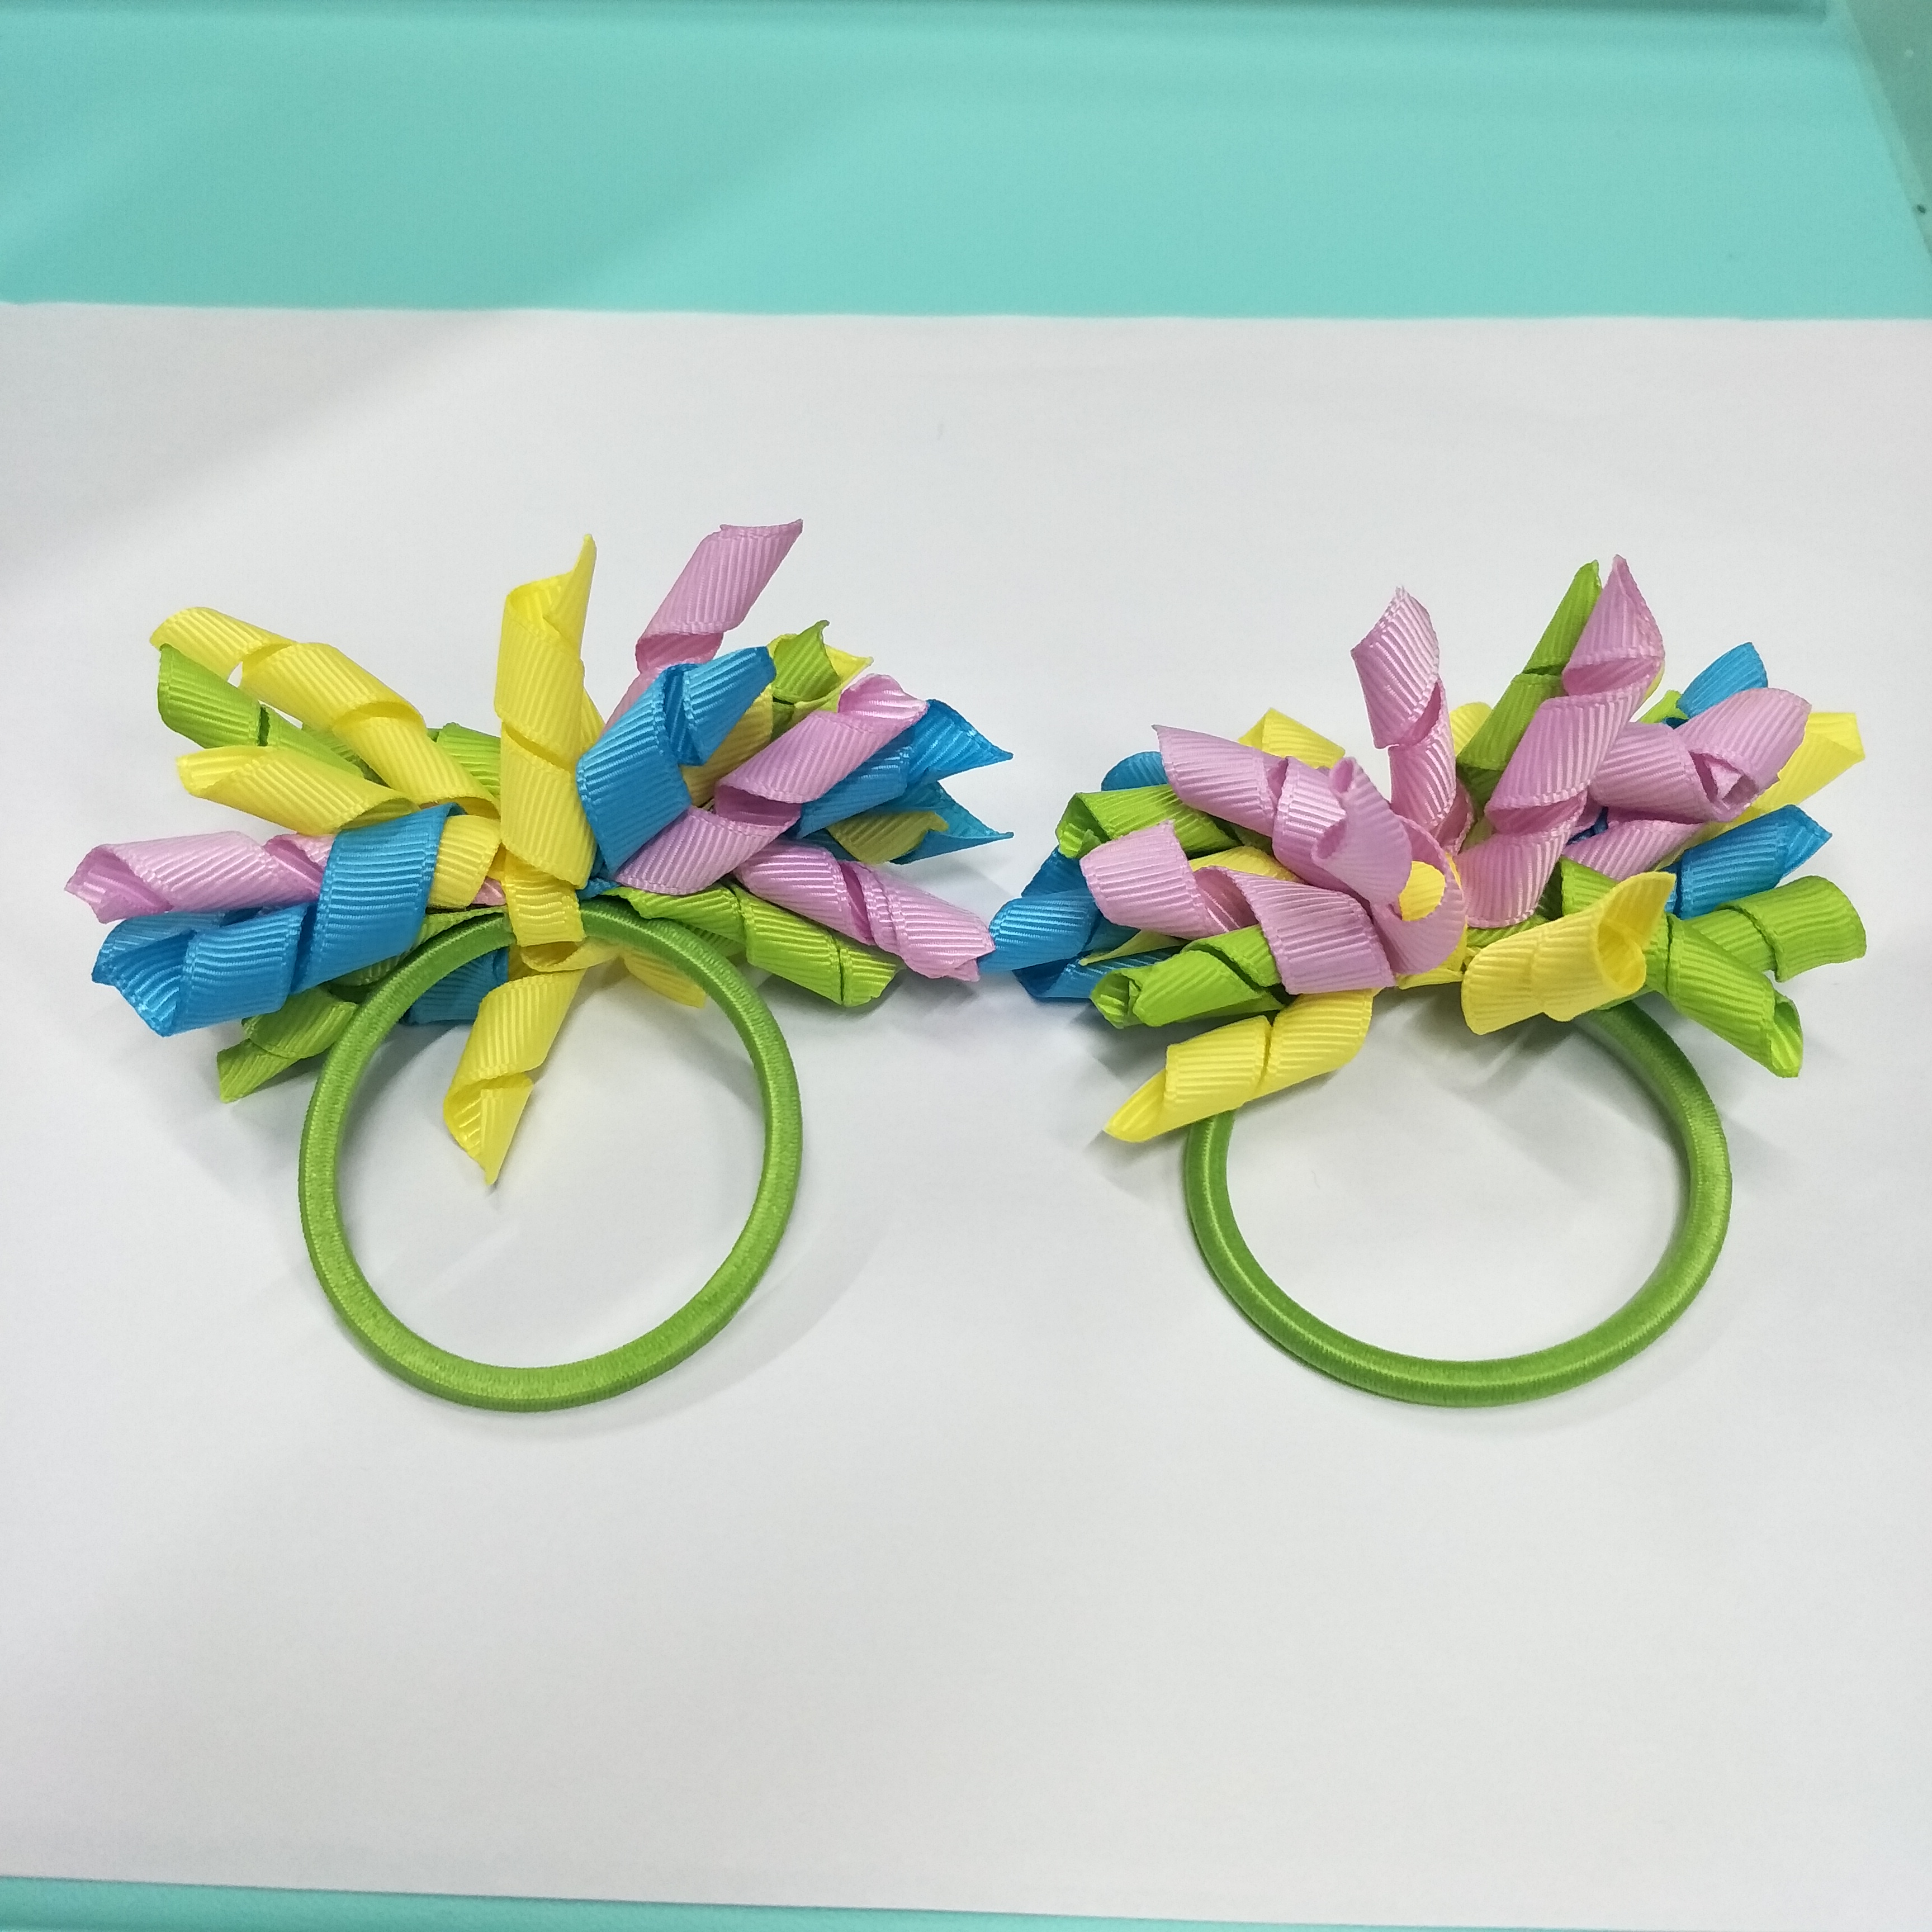 Gordon Wholesale  10cm Mix Color Boutique Girls' Curly Korker Bow Hair Clip Curly Grosgrain Ribbon Hair Bow With Elastic